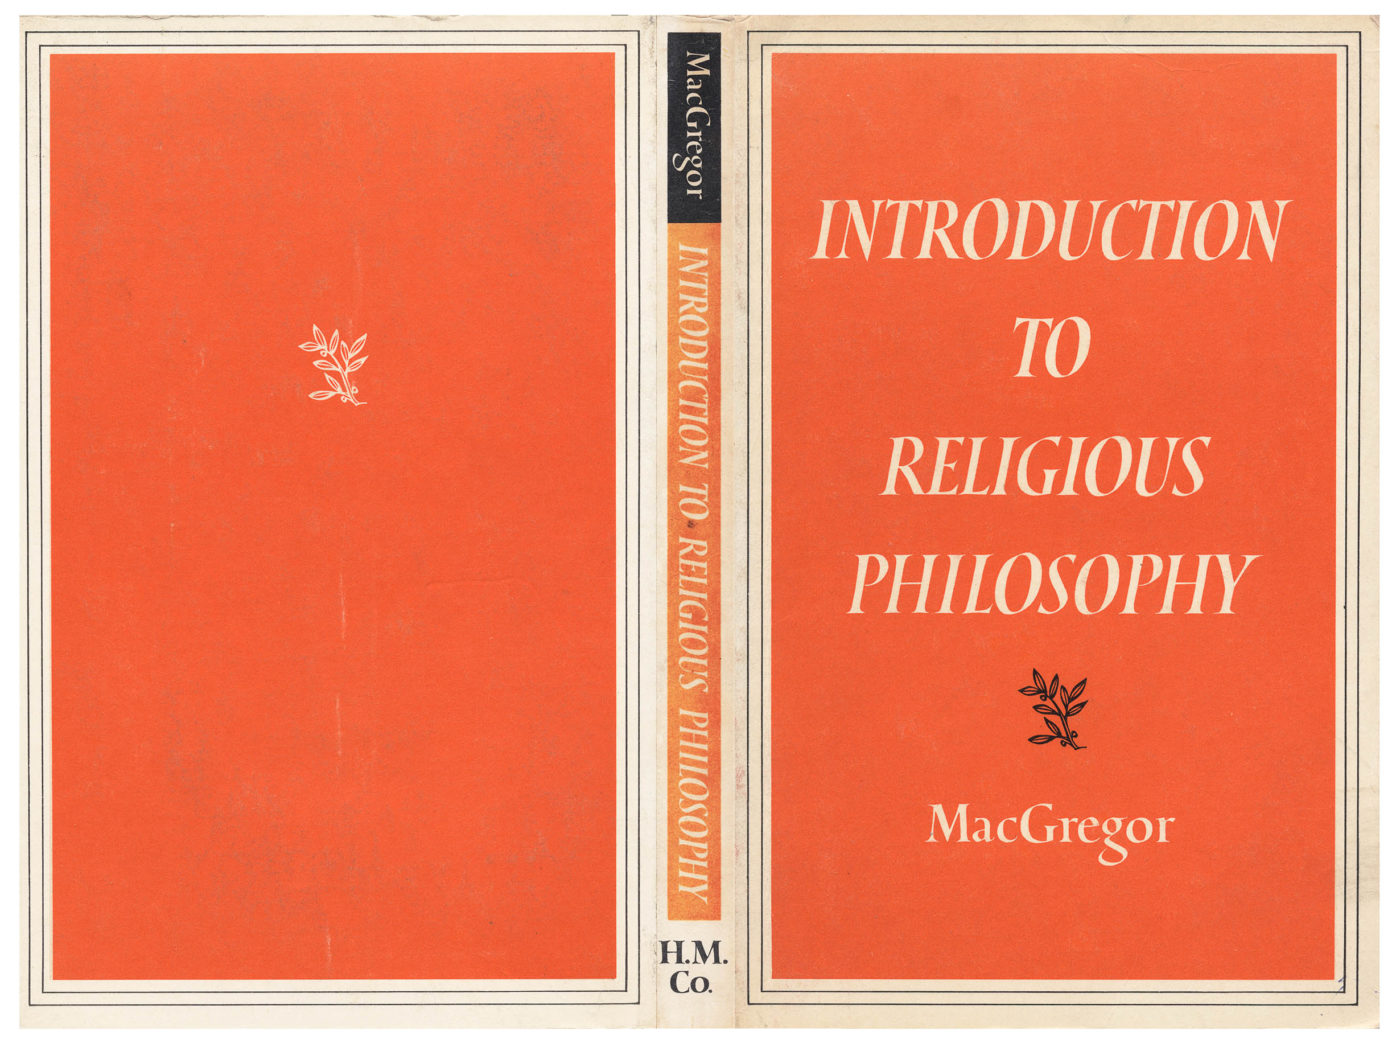 Introduction to Religious Philosophy